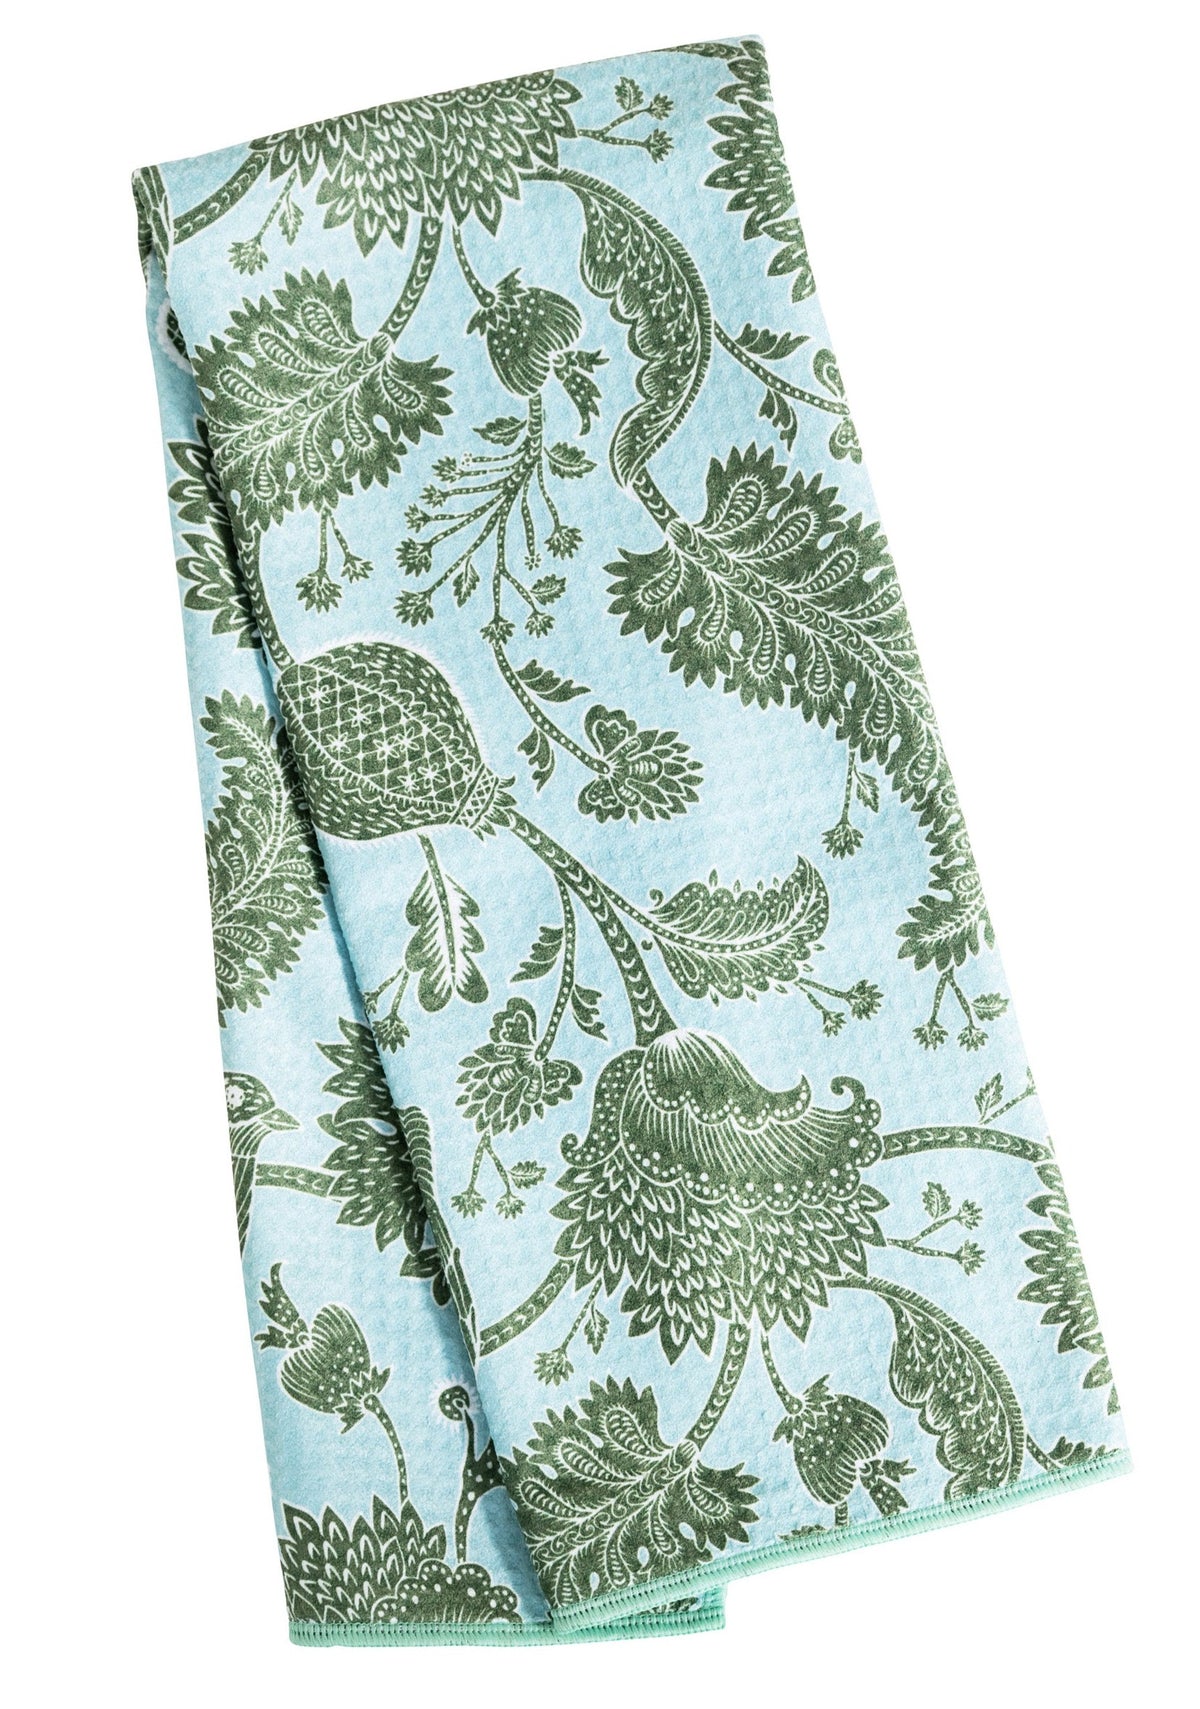 Anywhere Towel -  Aviary Kitchen Towels Once Again Home Co. Garden Green  